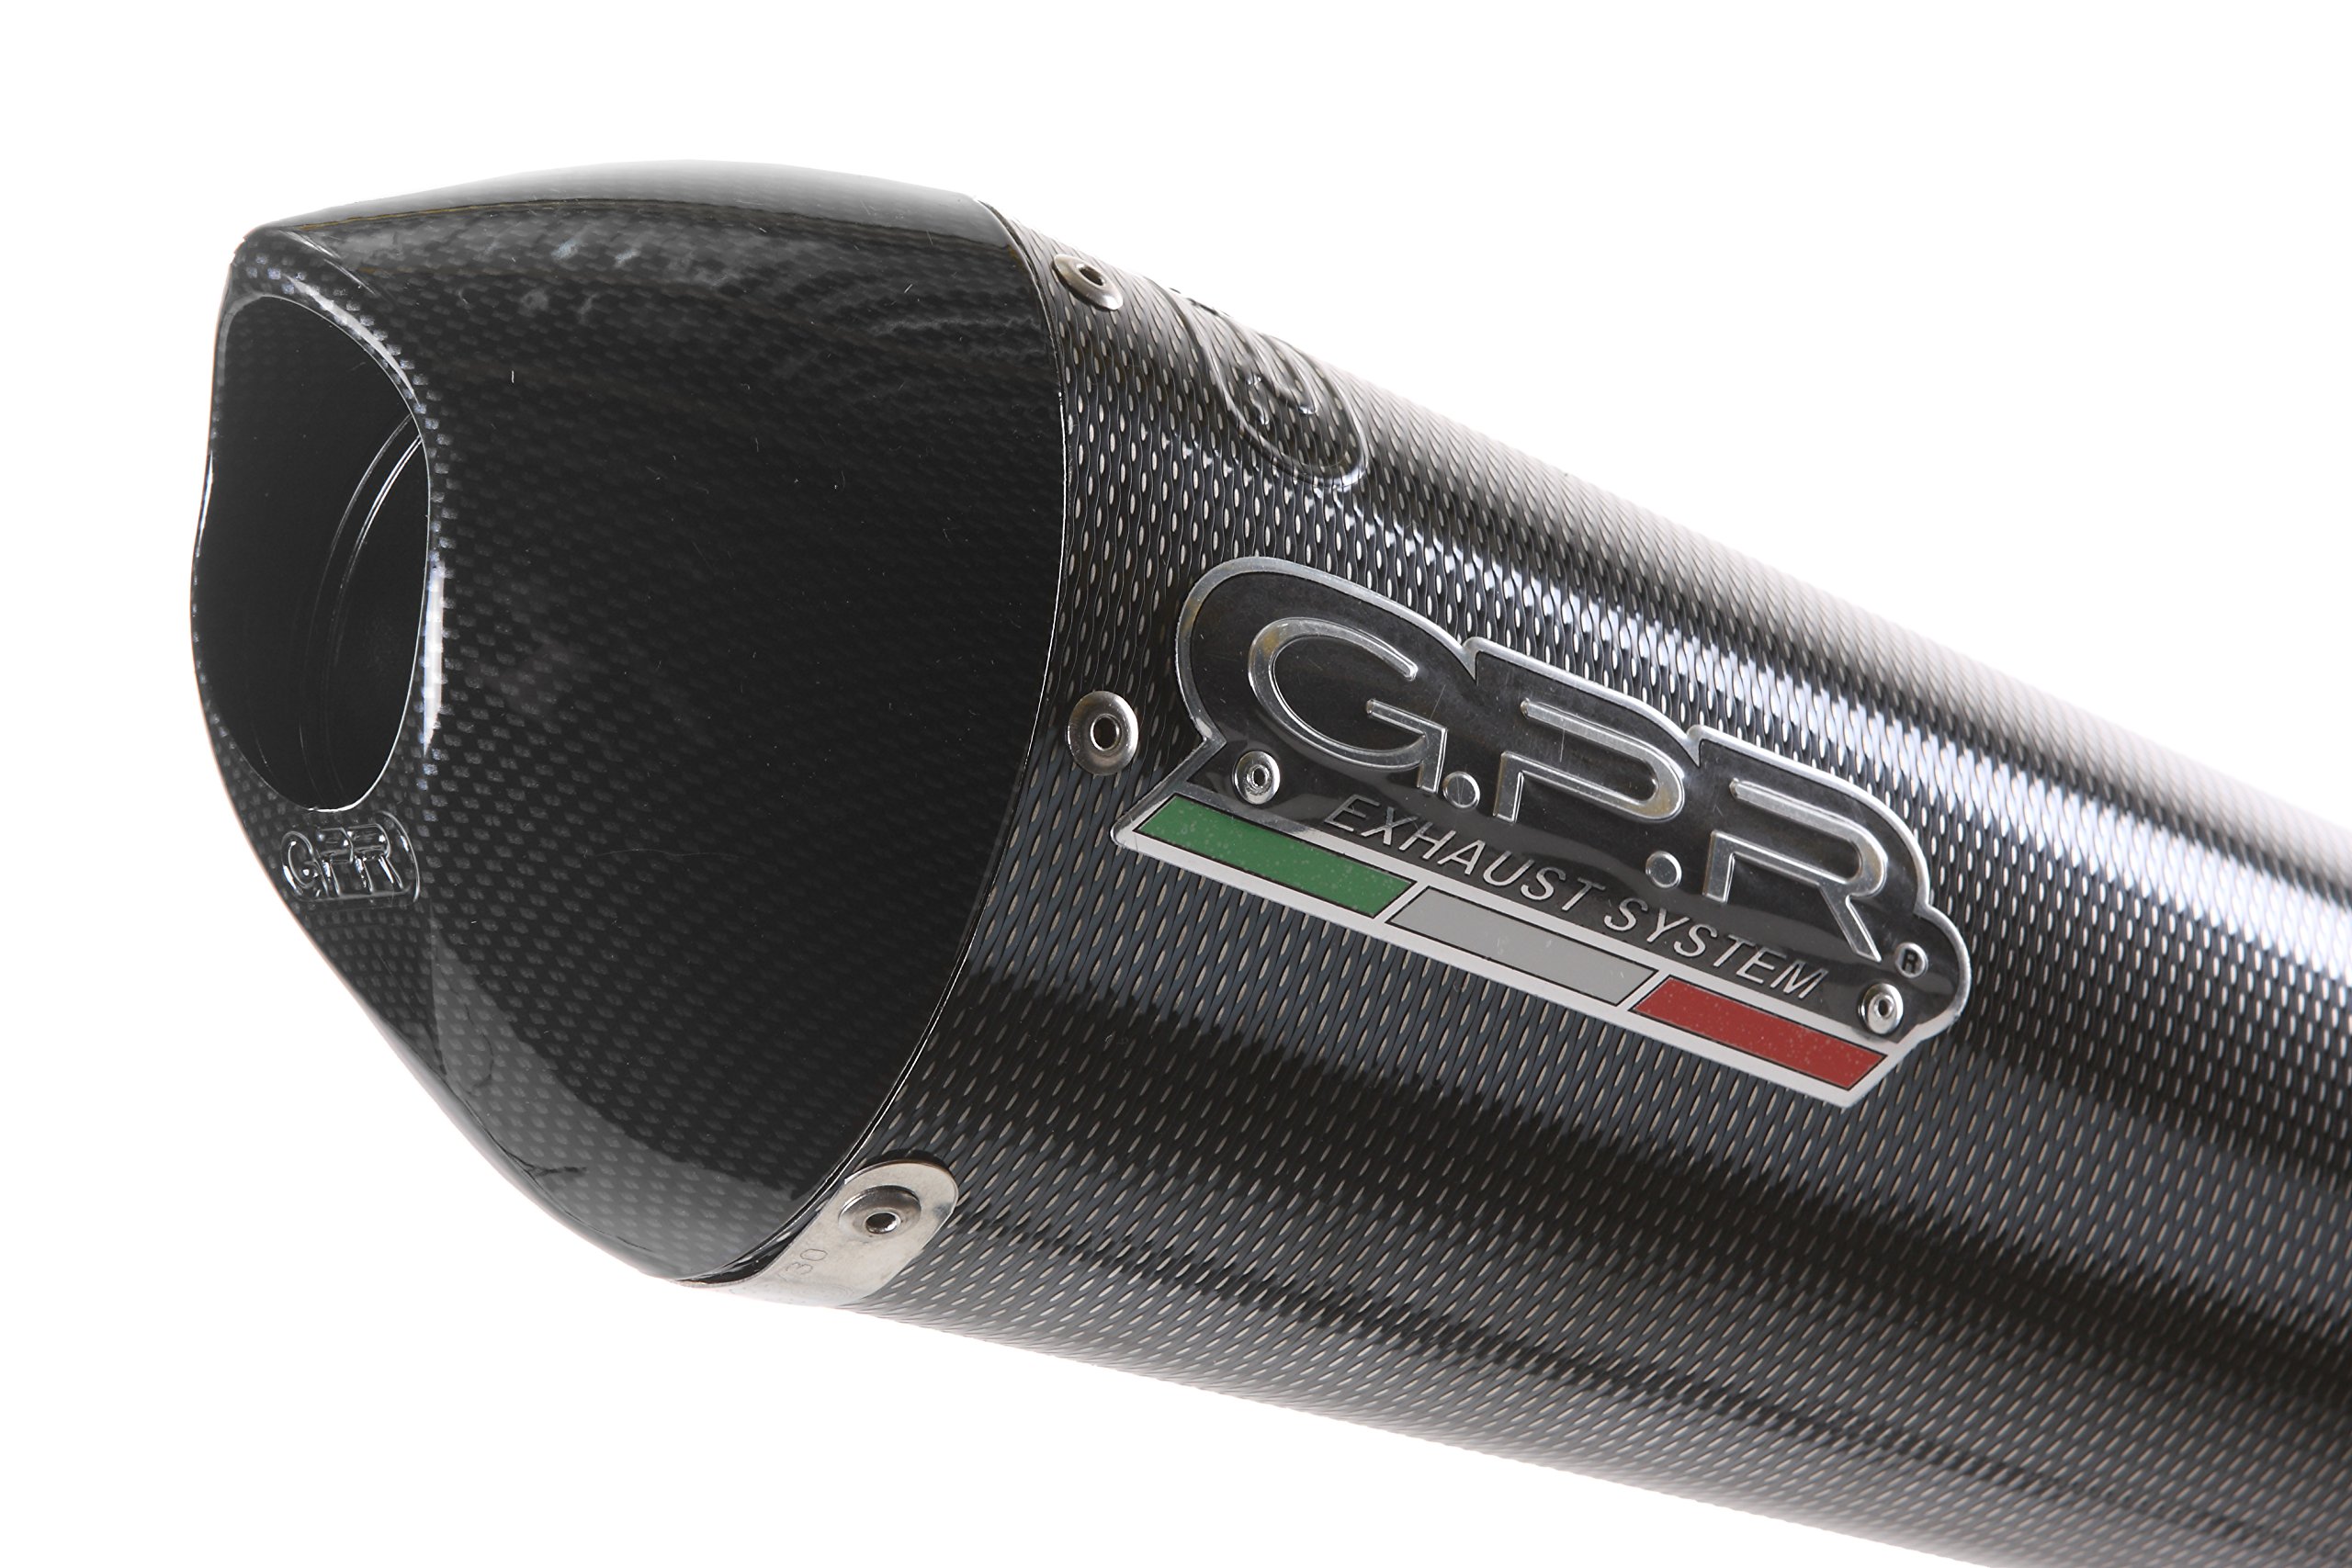 GPR Auspuff Endkappe – Yamaha YZF 1000 R1 2004/06 HOMOLOGATED Mid Full Exhaust System with Silencer with Catalyst by GPR Exhaust Systems der EVO Poppy Line